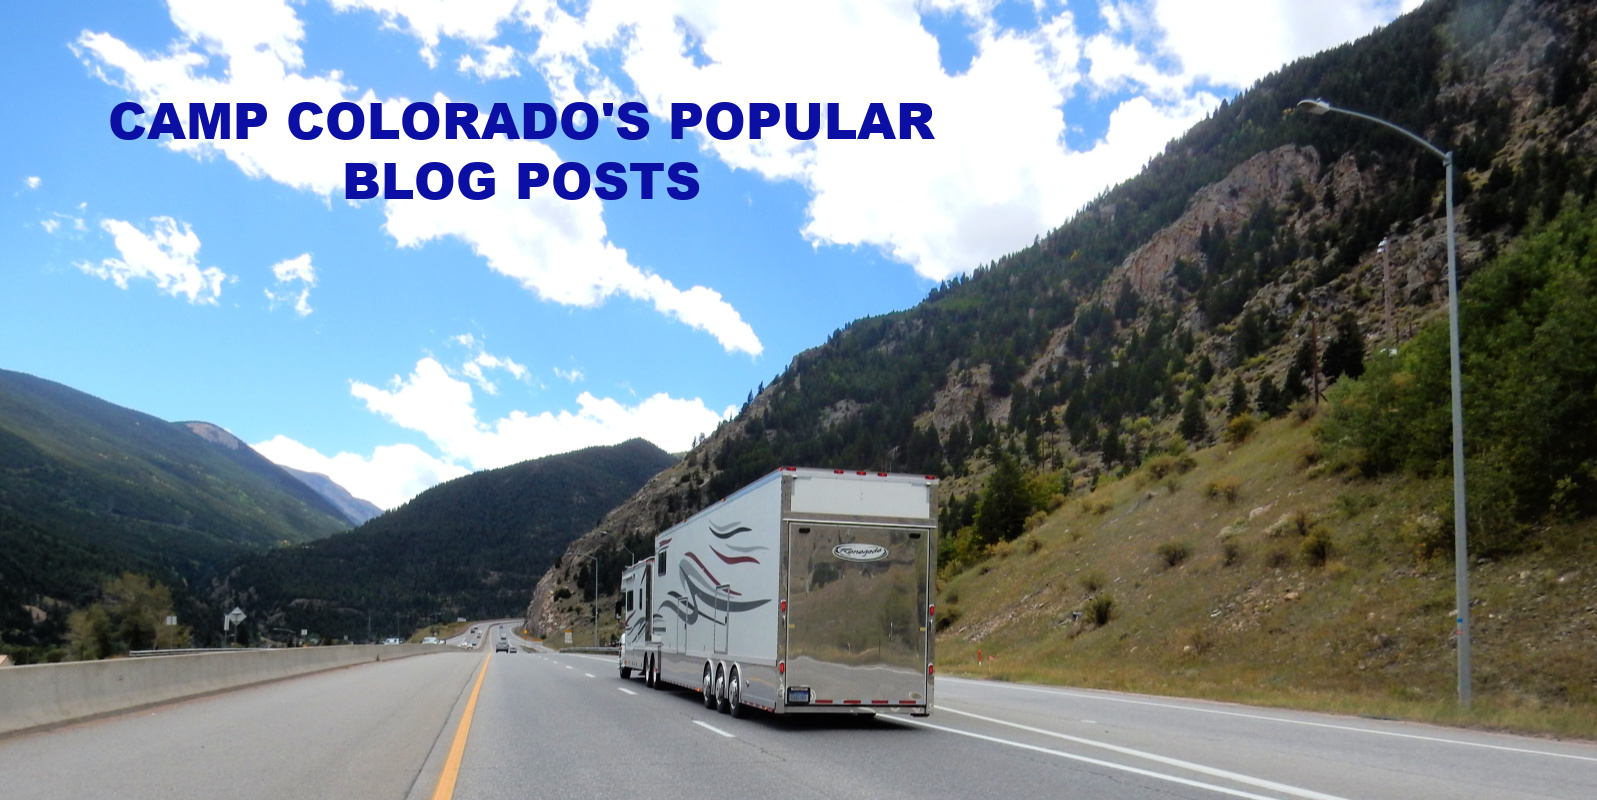 Camp Colorado’s Most Popular Blog Posts (To Date)